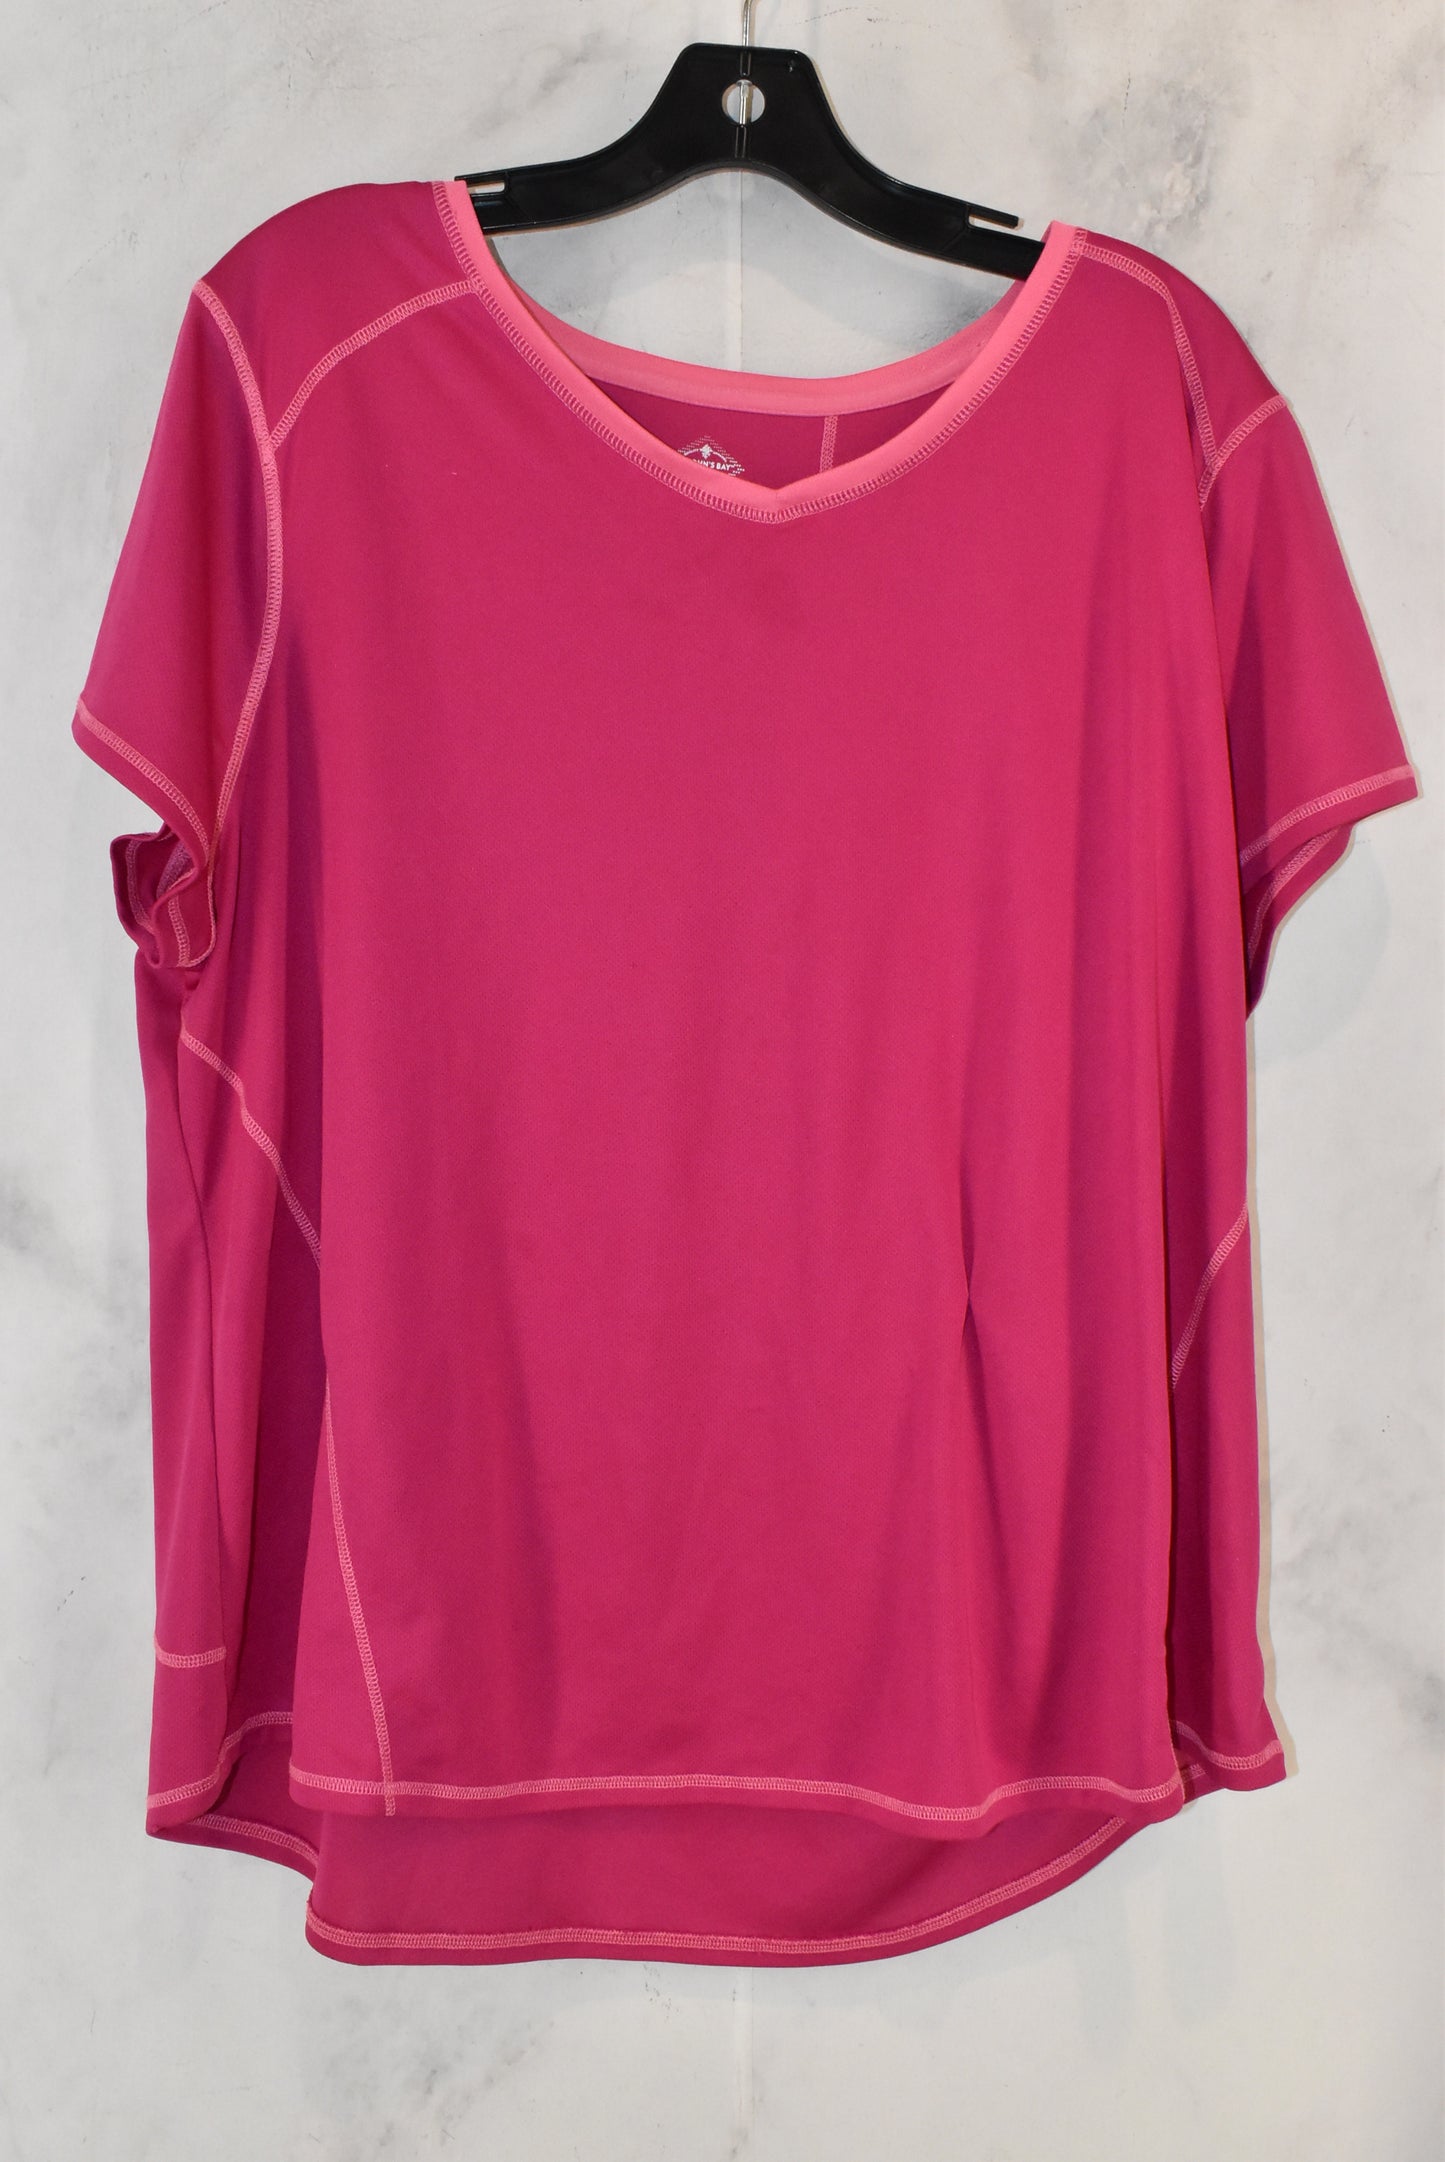 Athletic Top Short Sleeve By St Johns Bay  Size: 1x